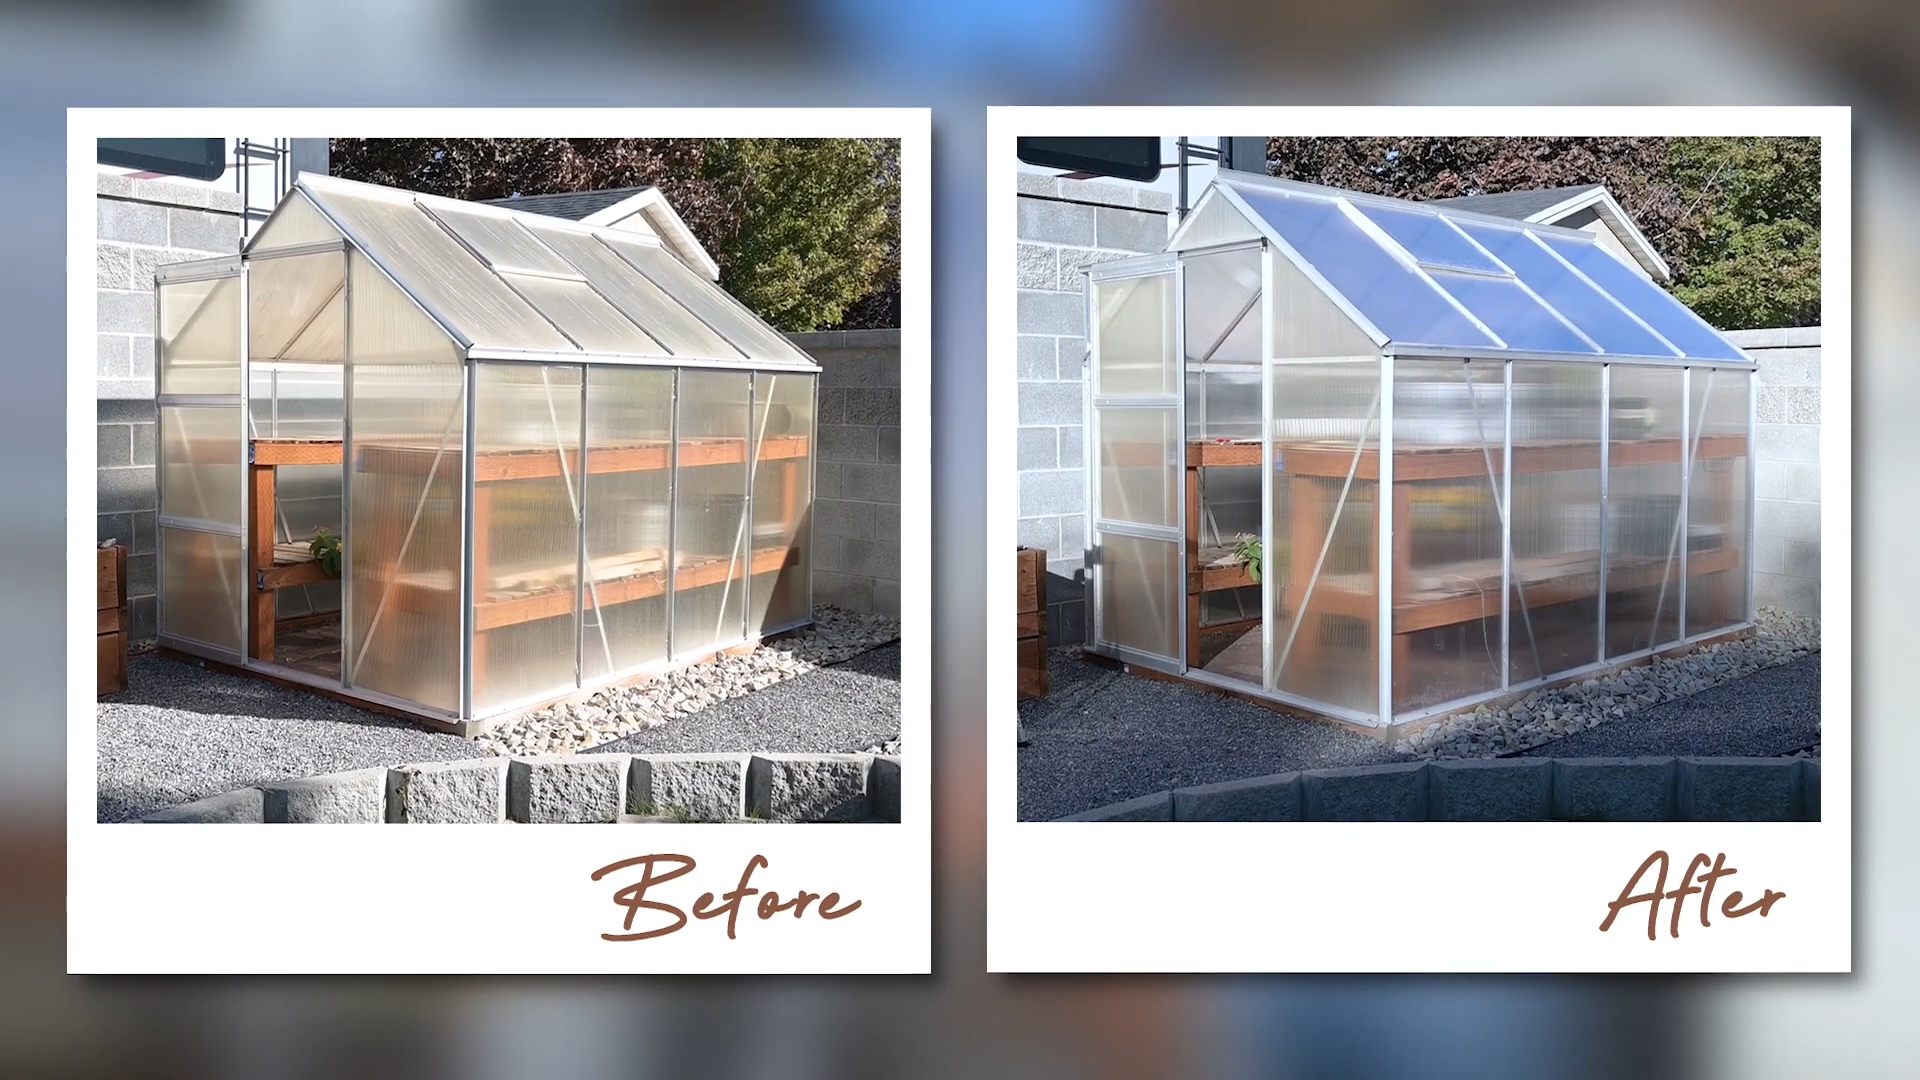 Side-by-side comparison of two greenhouses, the greenhouse on the left has old and cloudy panels while the greenhouse on the right has clear and new panels